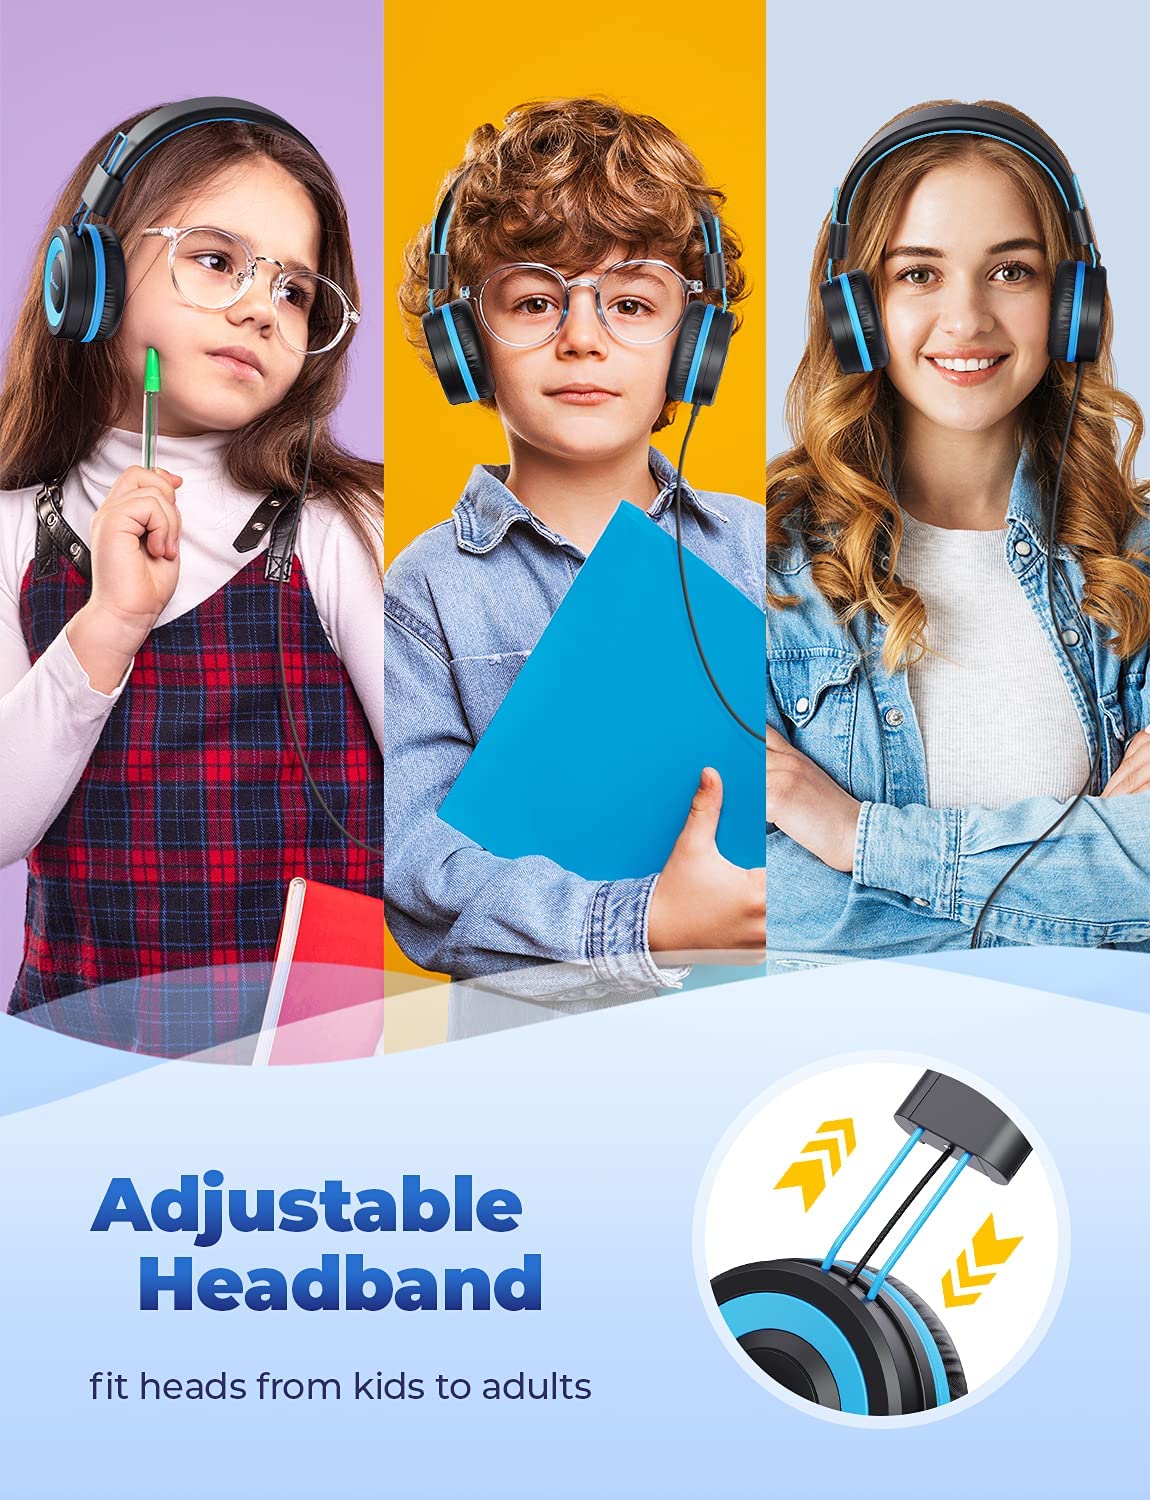 iClever HS14 Kids Headphones, Headphones for Kids with 94dB Volume Limited for Boys Girls, Adjustable Headband, Foldable, Child Headphones on Ear for Study Tablet Airplane School.